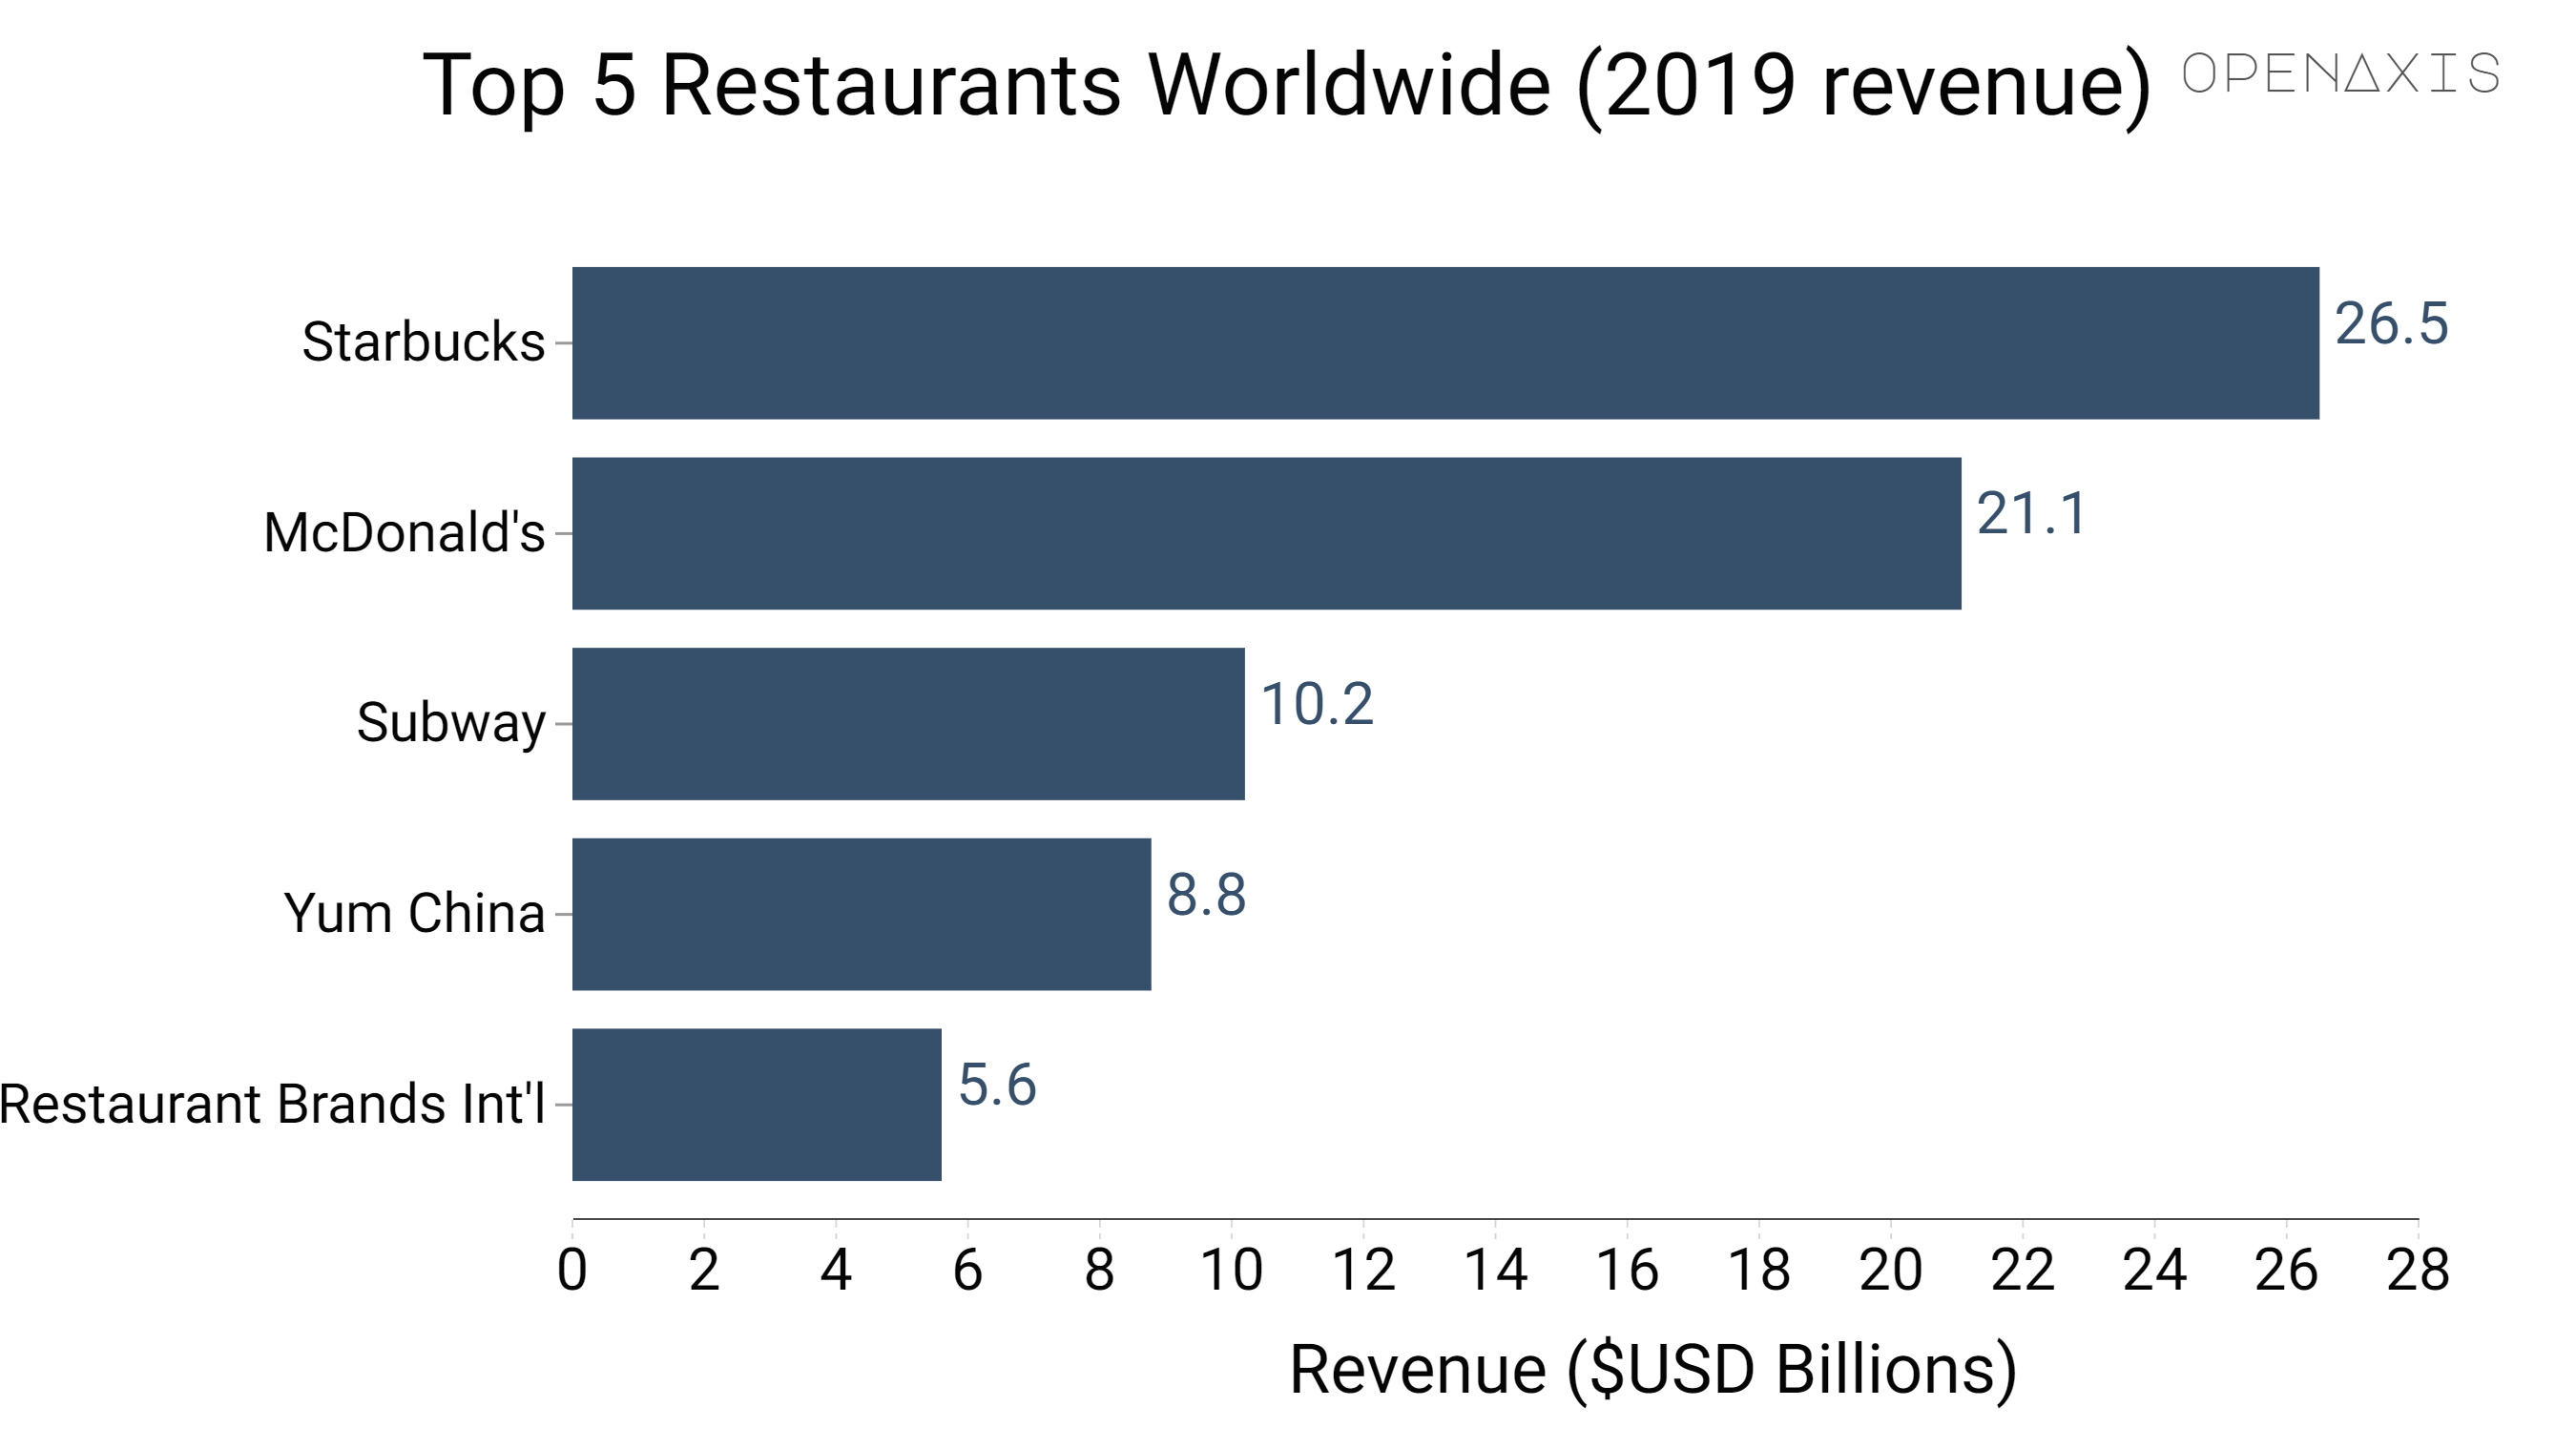 <p>The top three of the ten largest restaurant chains in the world are from the US. Verdict Foodservice lists the world’s biggest restaurants in 2020, based on 2019 revenues, and details the impact of the Covid-19 outbreak on their operations.</p><p><br /></p><p><span data-index="0" data-denotation-char data-id="0" data-value="&lt;a href=&quot;/search?q=%23restaurants&quot; target=_self&gt;#restaurants" data-link="/search?q=%23restaurants">﻿<span contenteditable="false"><span></span><a href="/search?q=%23restaurants" target="_self">#restaurants</a></span>﻿</span> <span data-index="0" data-denotation-char data-id="0" data-value="&lt;a href=&quot;/search?q=%23food&quot; target=_self&gt;#food" data-link="/search?q=%23food">﻿<span contenteditable="false"><span></span><a href="/search?q=%23food" target="_self">#food</a></span>﻿</span></p><p><br /></p><p>Source: <a href="/data/3848" target="_blank">Verdict Foodservice</a></p><p><br /></p>